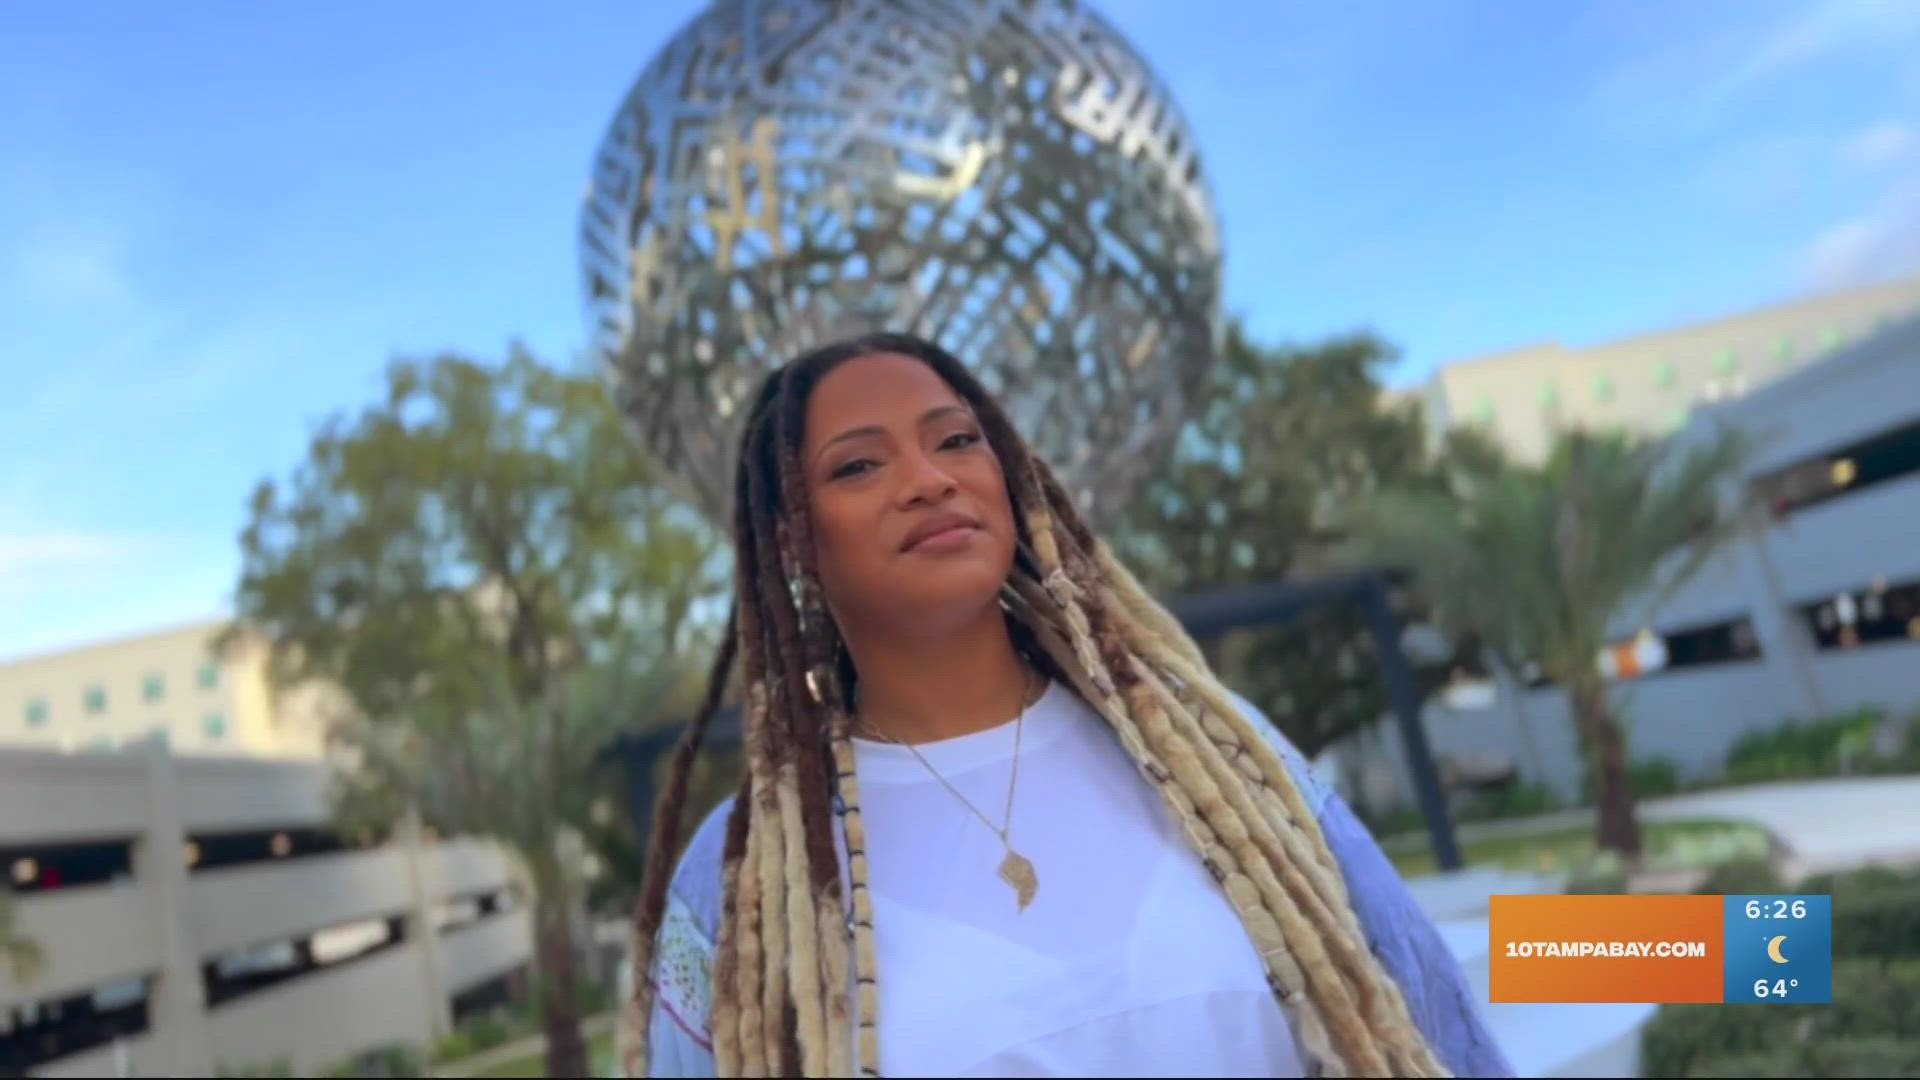 Ya La'Ford infuses the intersections and crossroads of the Tampa Bay community in her artwork. She also is ensuring kids have access to art and museums.